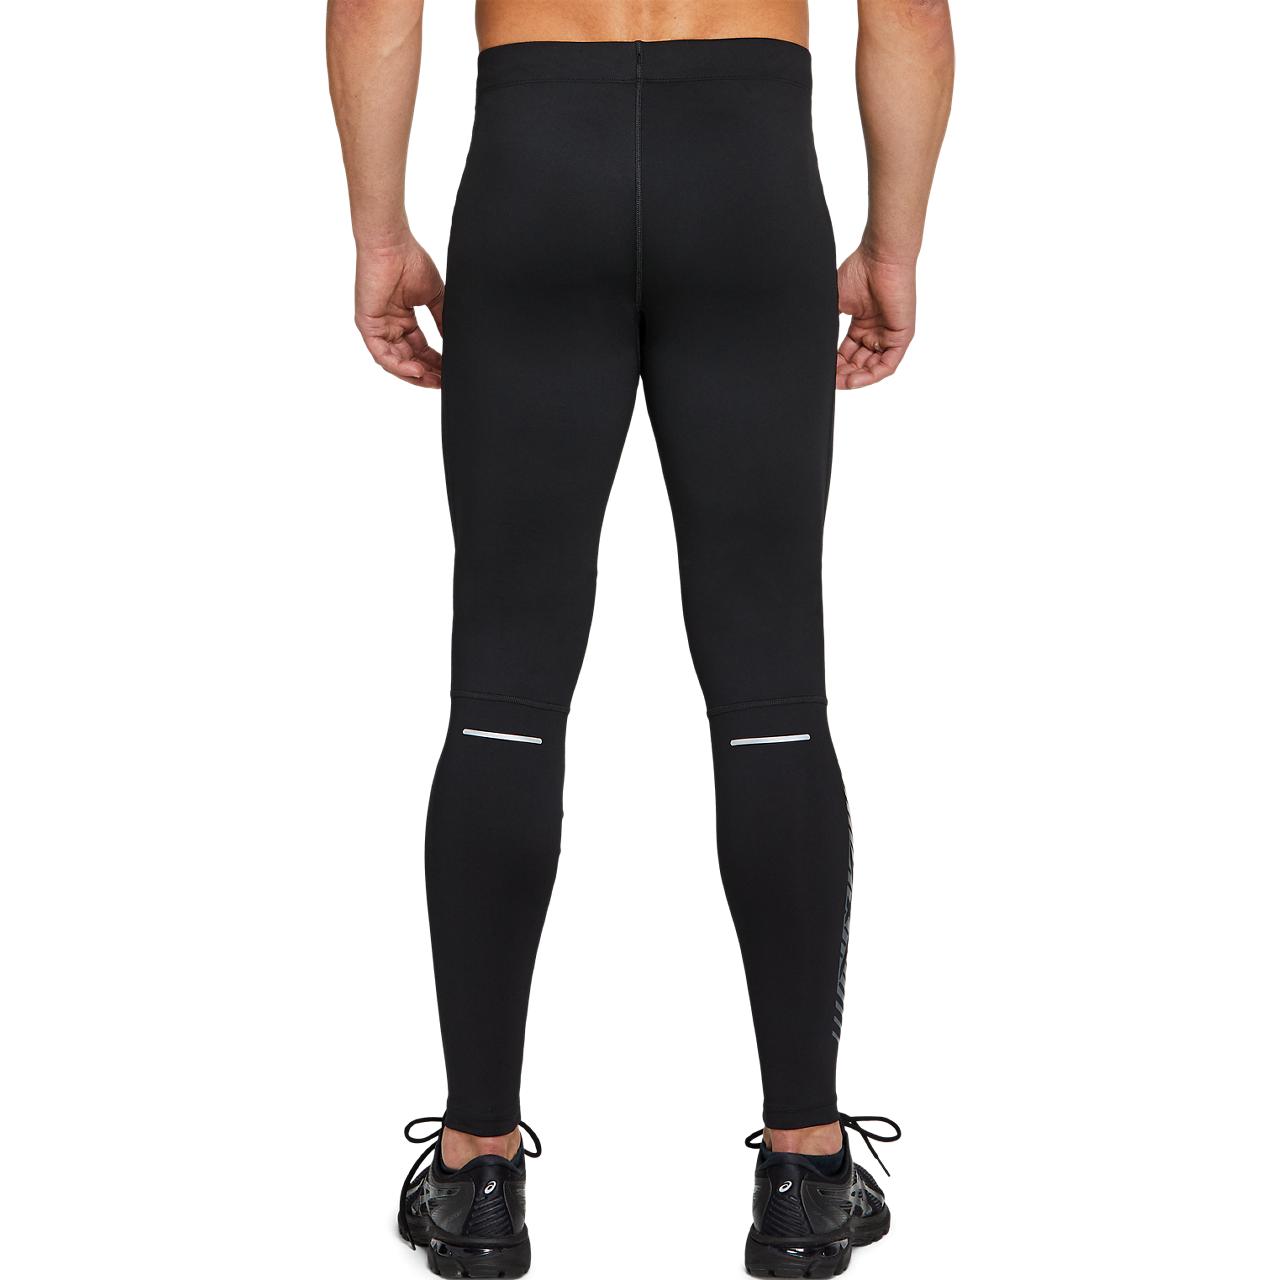 Men's Icon Tights PERFORMANCE BLACK/CARRIER GREY | Buy Men's Icon Tights  PERFORMANCE BLACK/CARRIER GREY here | Outnorth